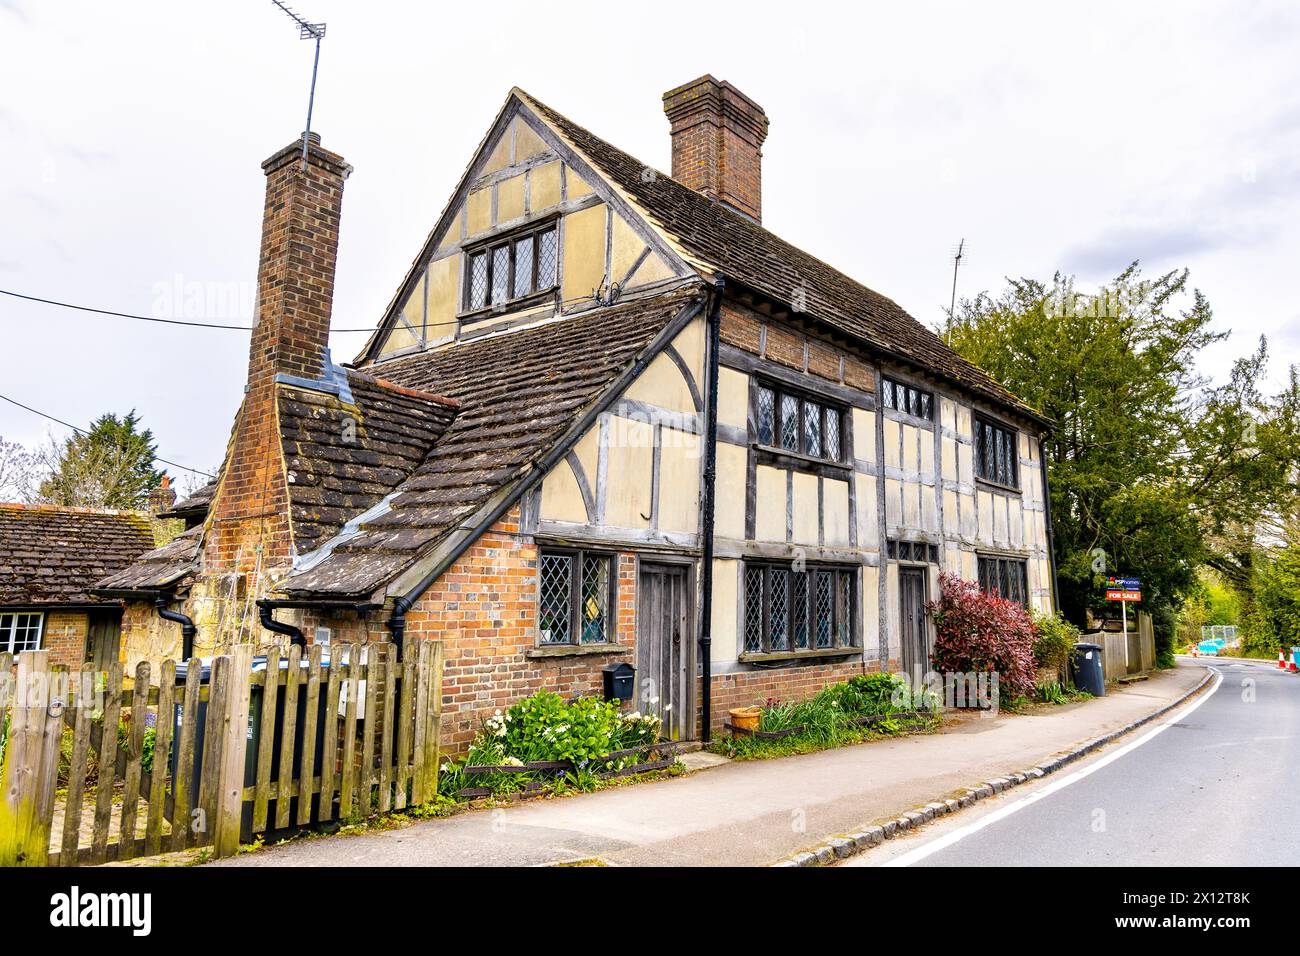 Historic Grade II listed 17th century timber framed Casteye Cottages in Balcombe, West Sussex, England Stock Photo